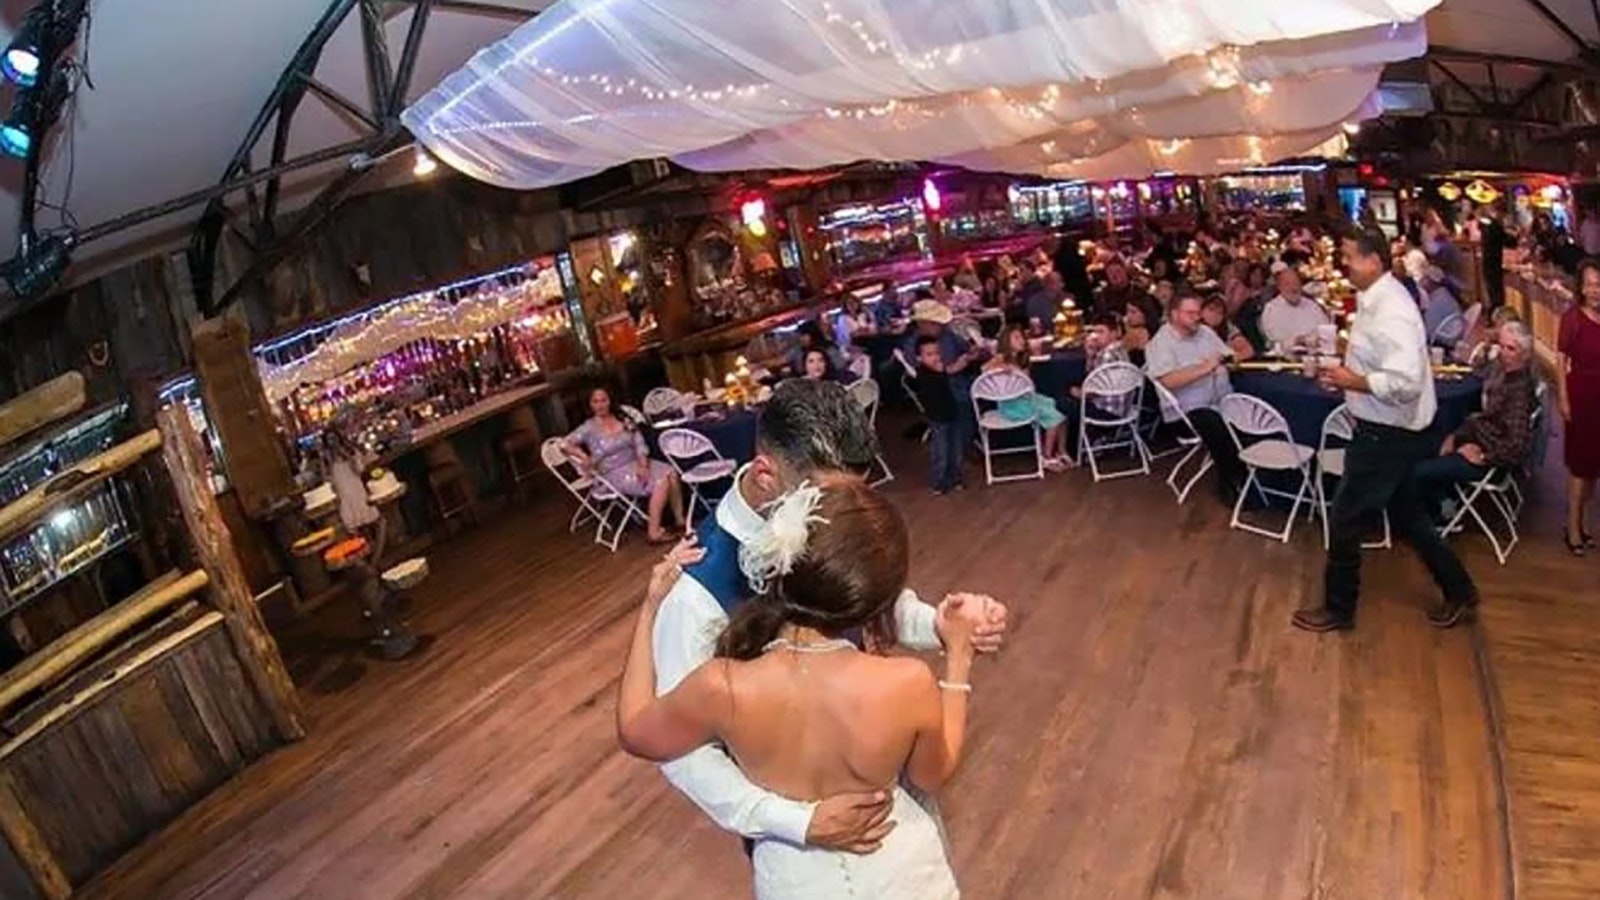 The Cowboy Saloon & Dance Hall is a popular venue for weddings in Laramie.